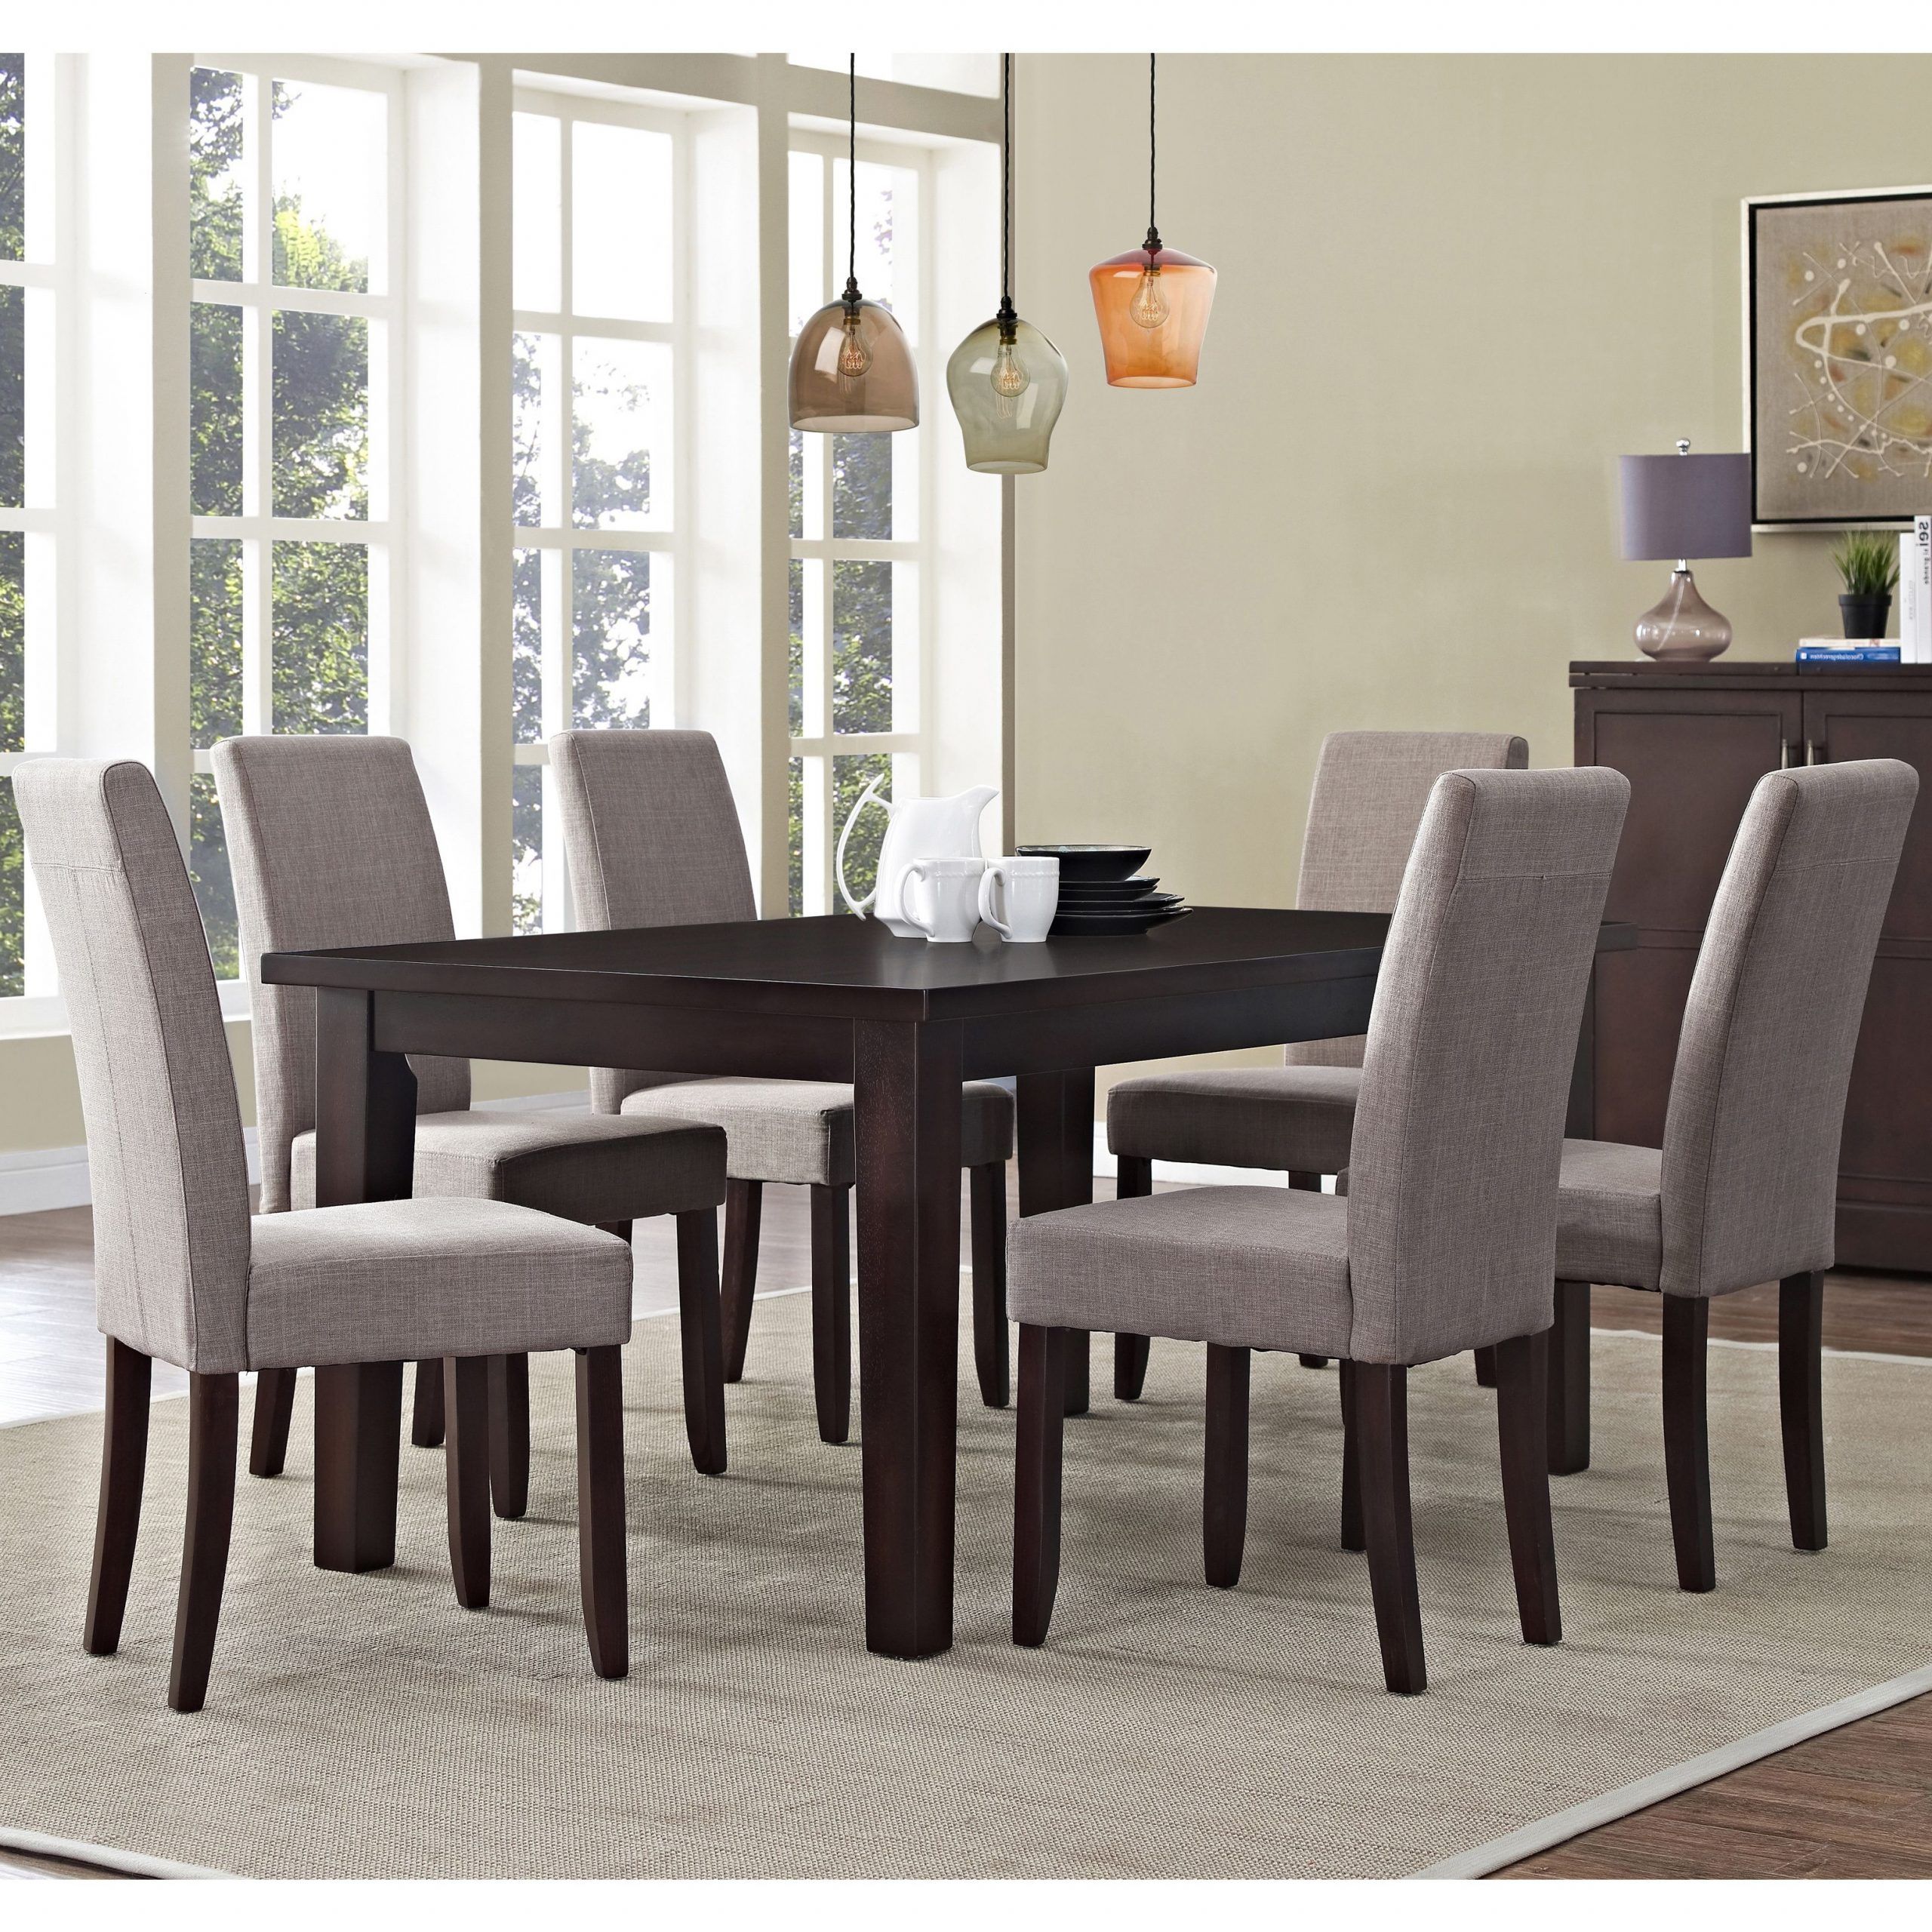 Most Current Normandy Extending Dining Tables For Dine In Sophisticated Style With This 7 Piece Wydenhall (View 11 of 25)